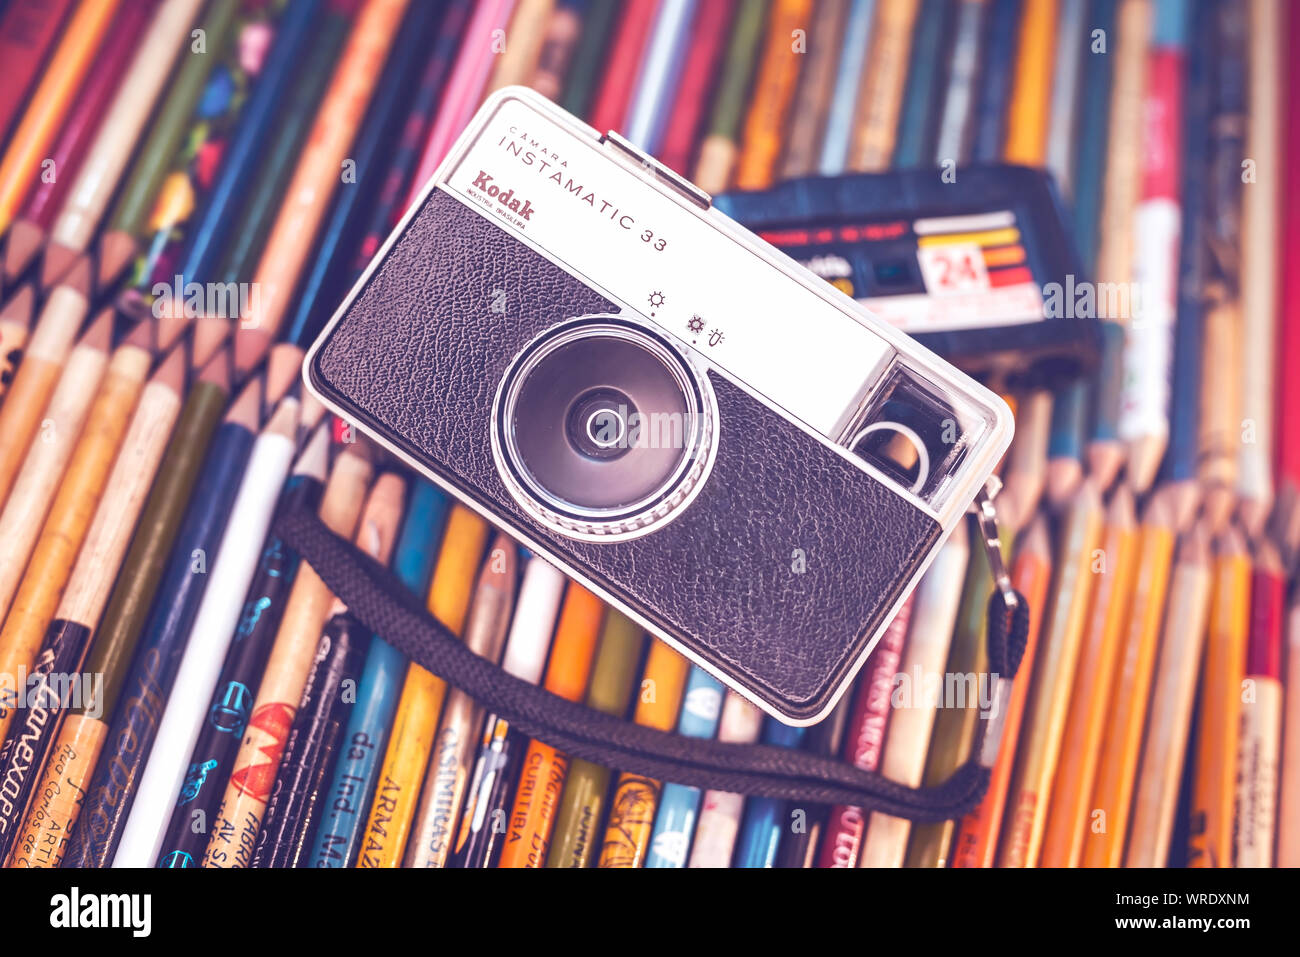 Old camera on top of old pencils, concept image of old and outdated but retro fashion. Stock Photo